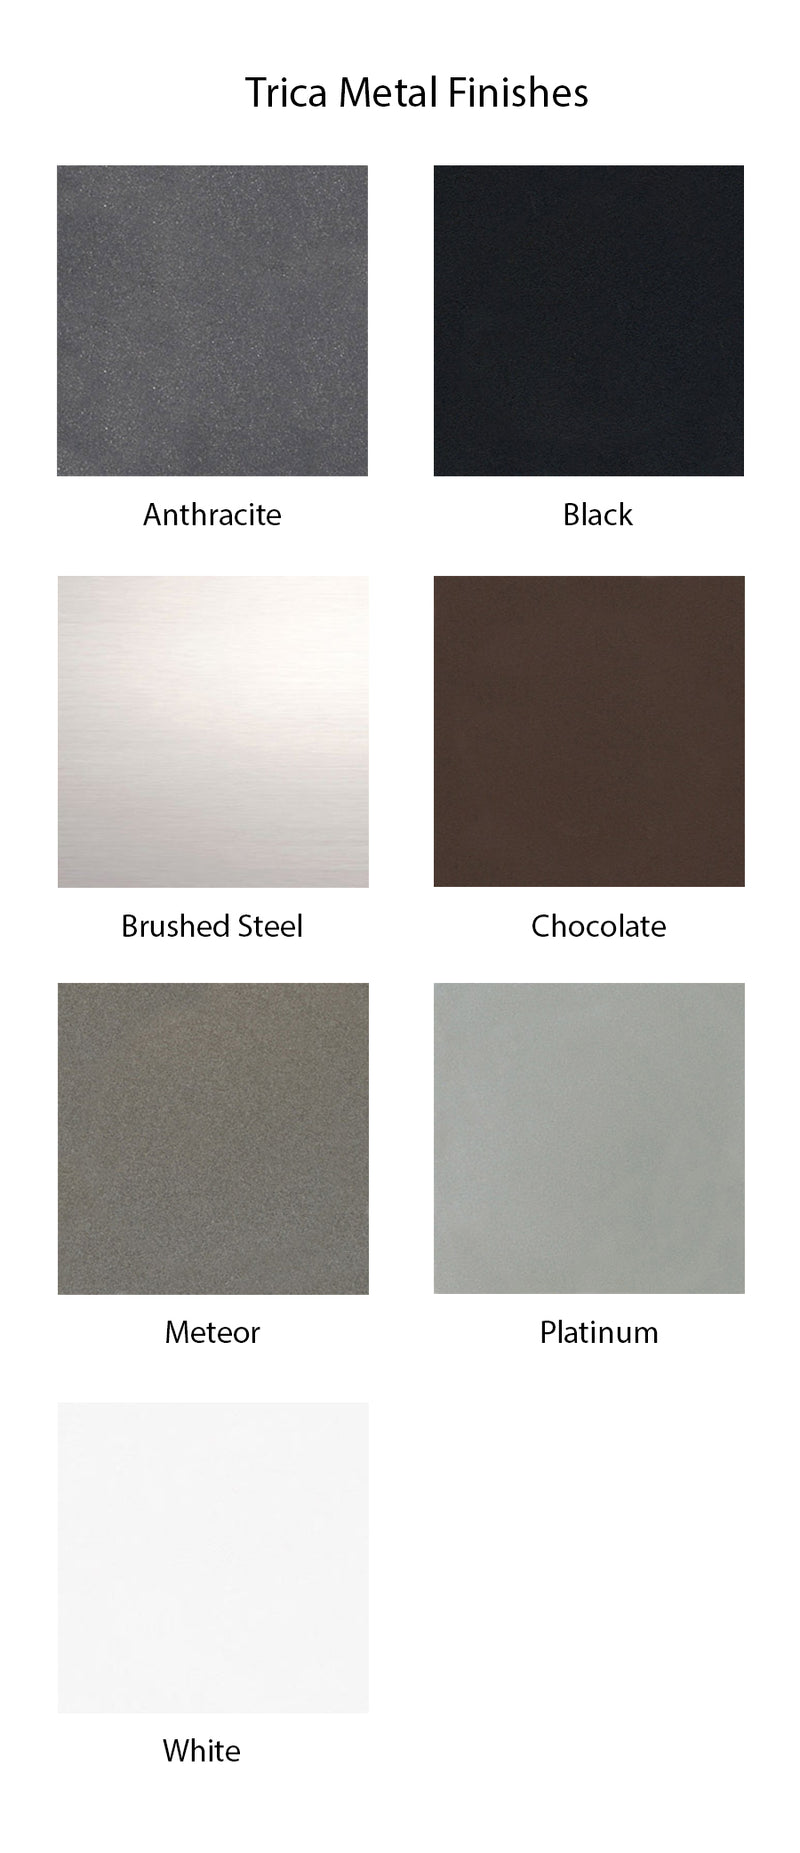 products/metal-finishes-trica_778d80a5-1180-40ae-b8f7-610224e0a529.jpg